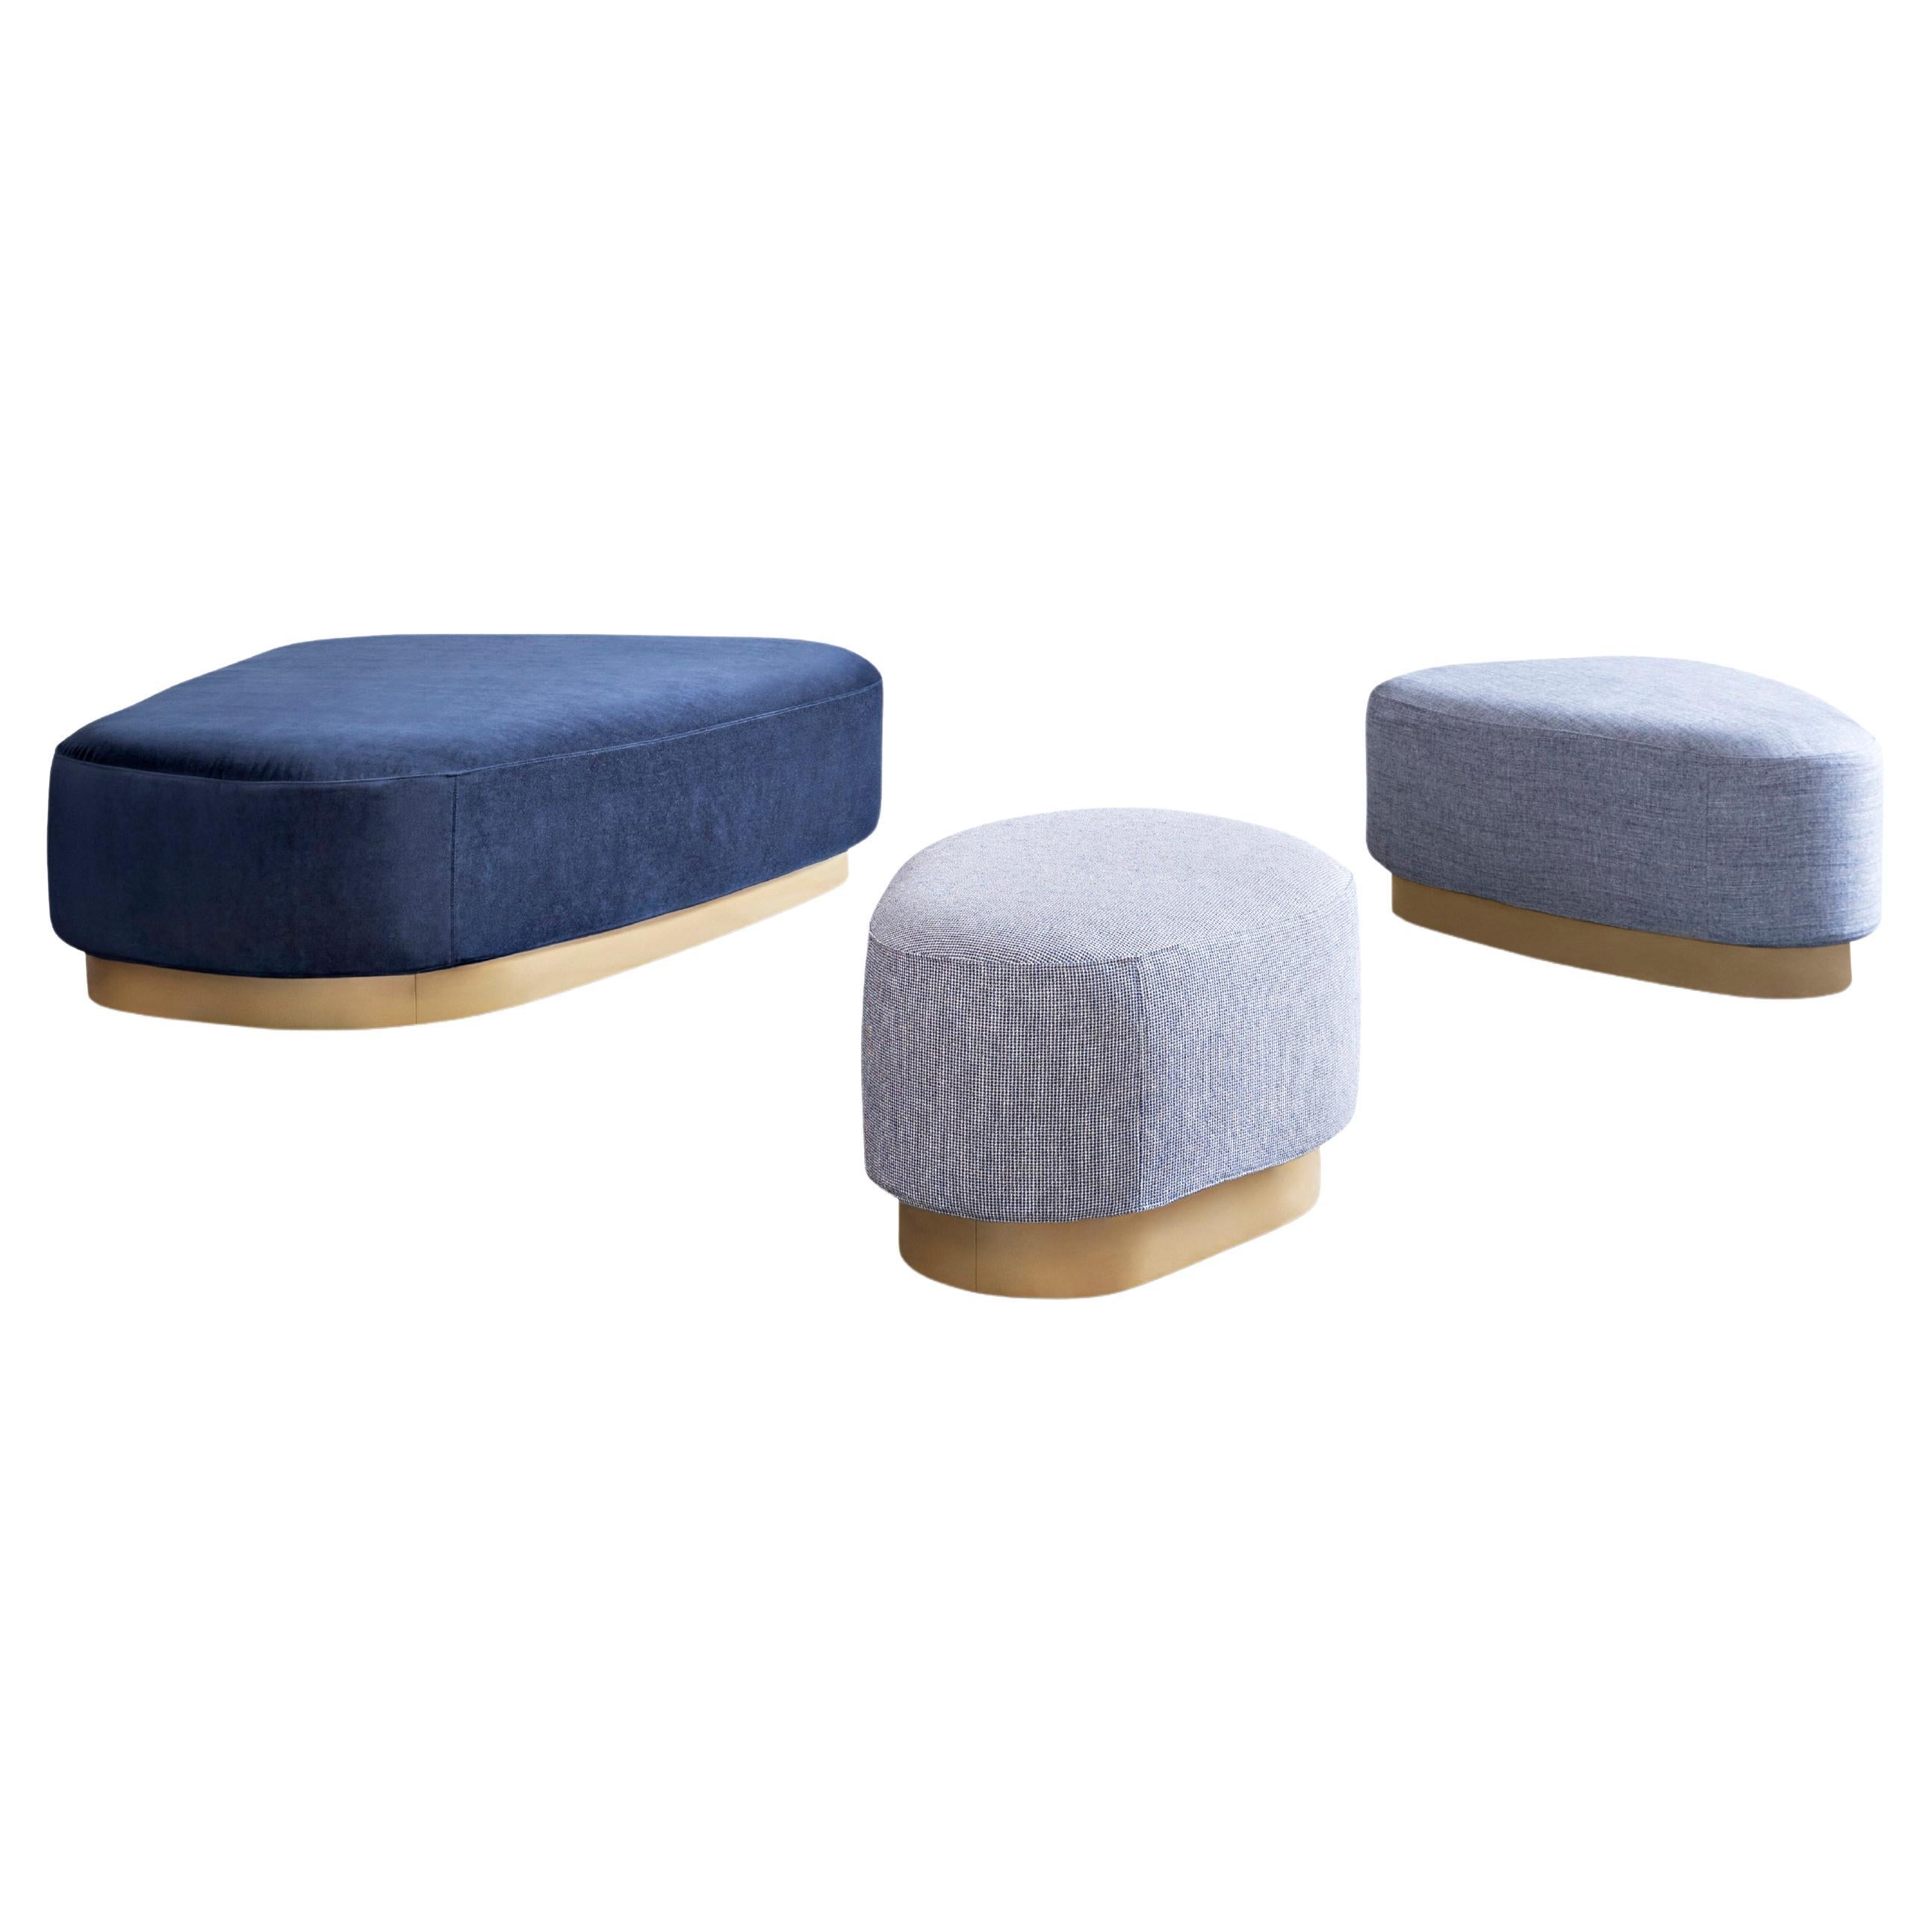 Island Large Pouf in Lario Blue Upholstery & Brass Base by Serena Confalonieri For Sale